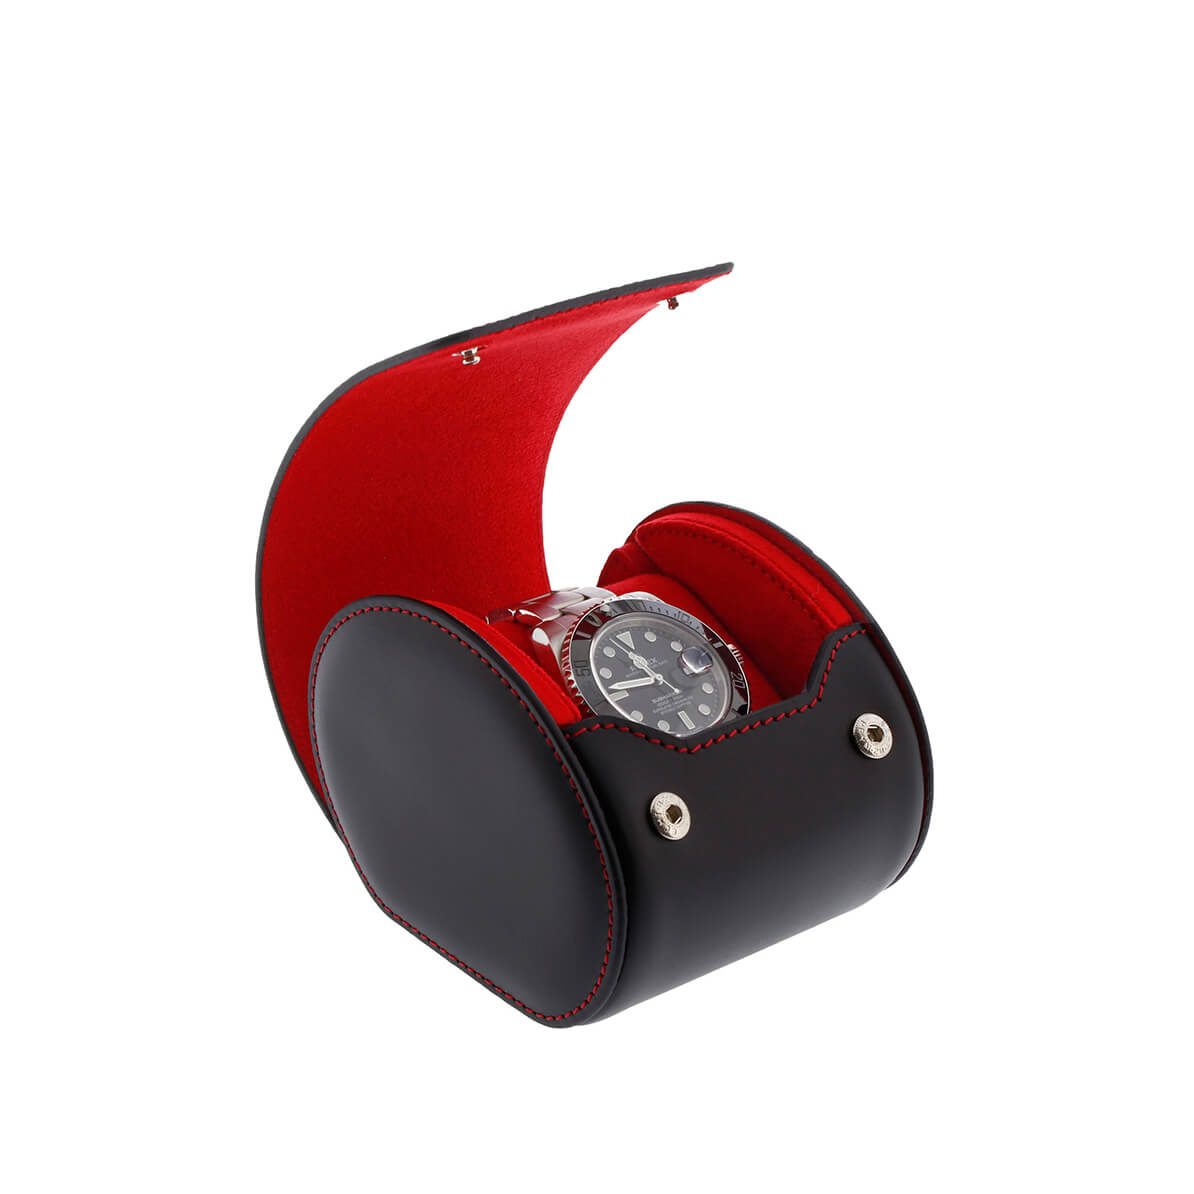 Single Watch Roll Case in Premium Black Nappa Leather with Red Lining by Aevitas